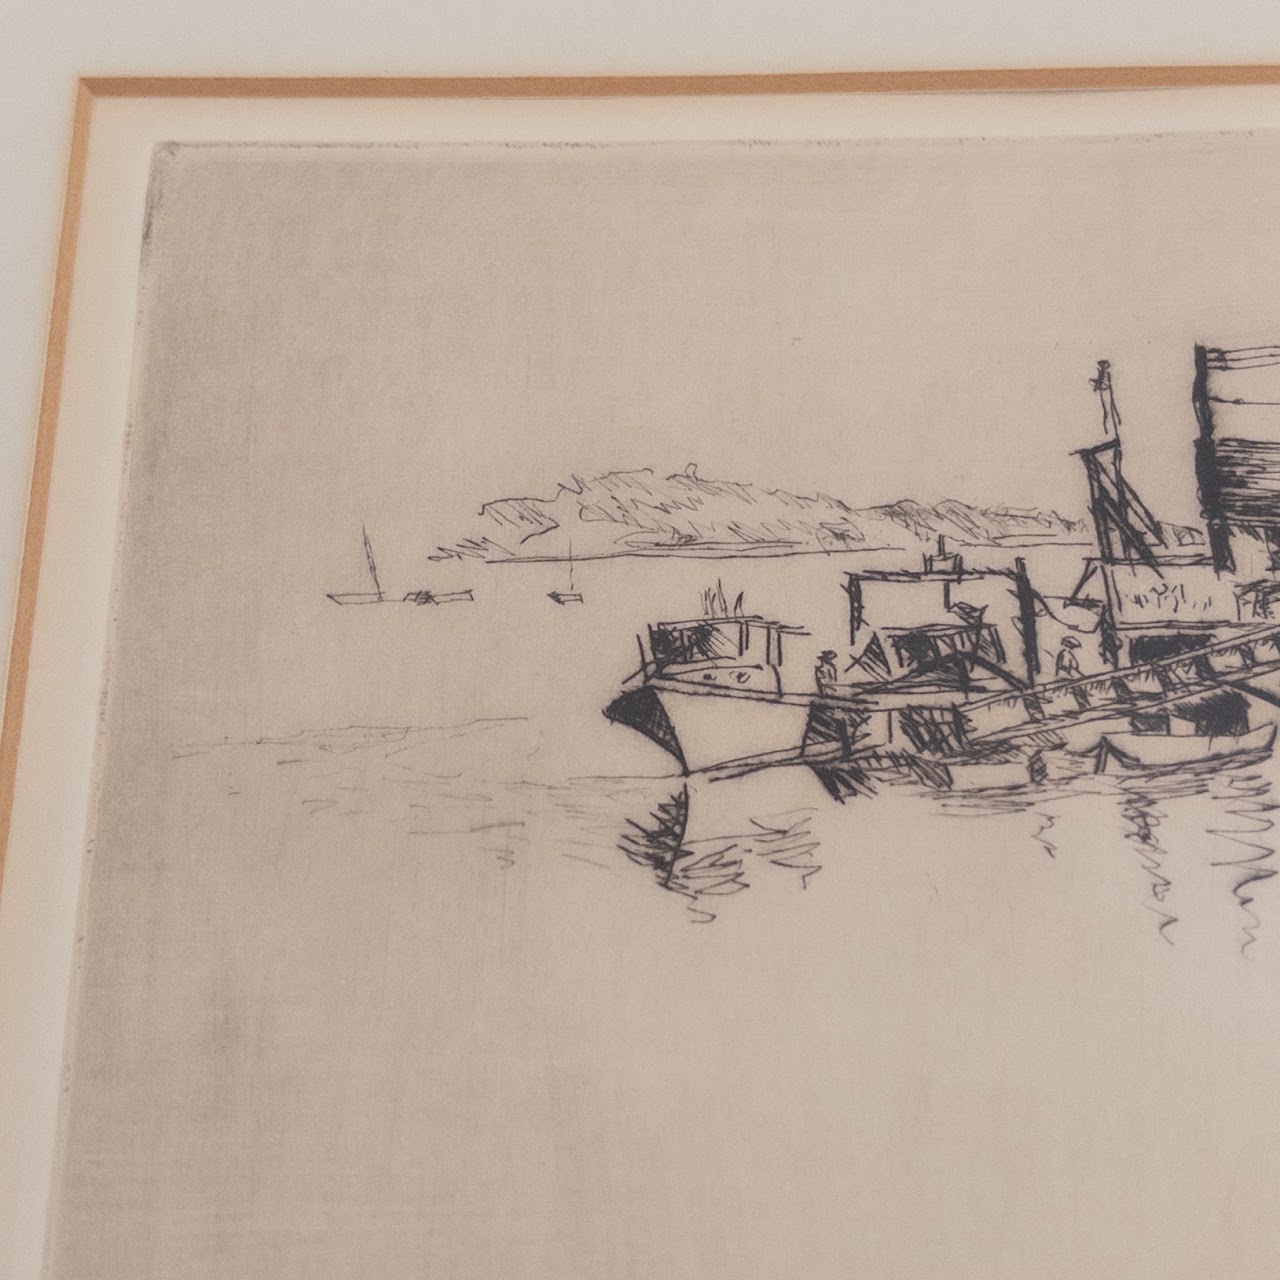 Herman Rose 'Bailey's Island' Signed Etching